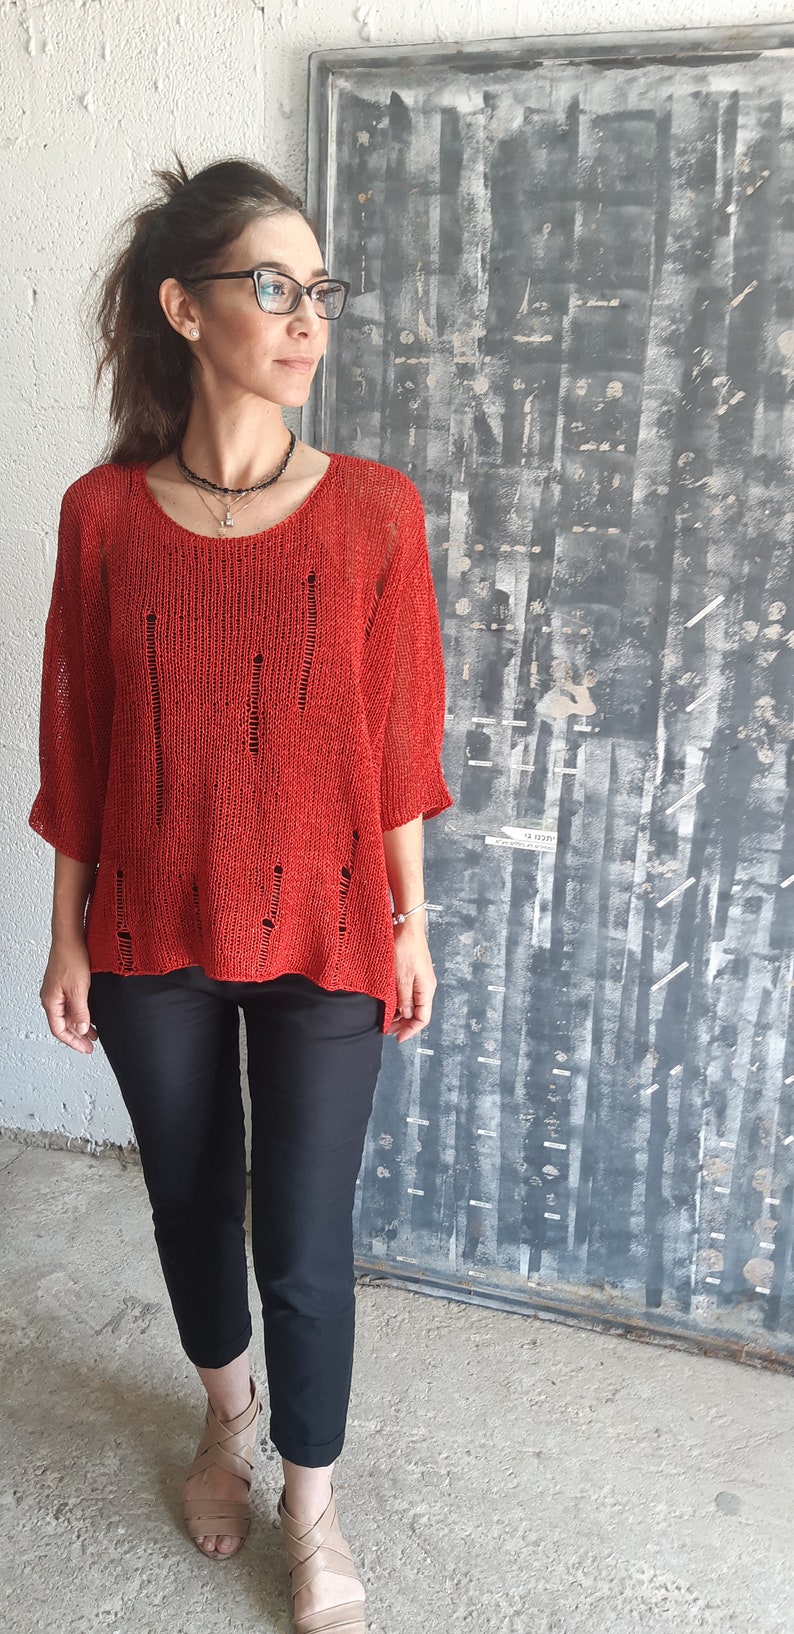 Bohemian Clothing, Red Sweater, Fashion Top, Oversized Sweater, Loose Top, Oversized Pullover, Boho Blouse, Sheer Blouse, 3/4 Sleeve Top image 4